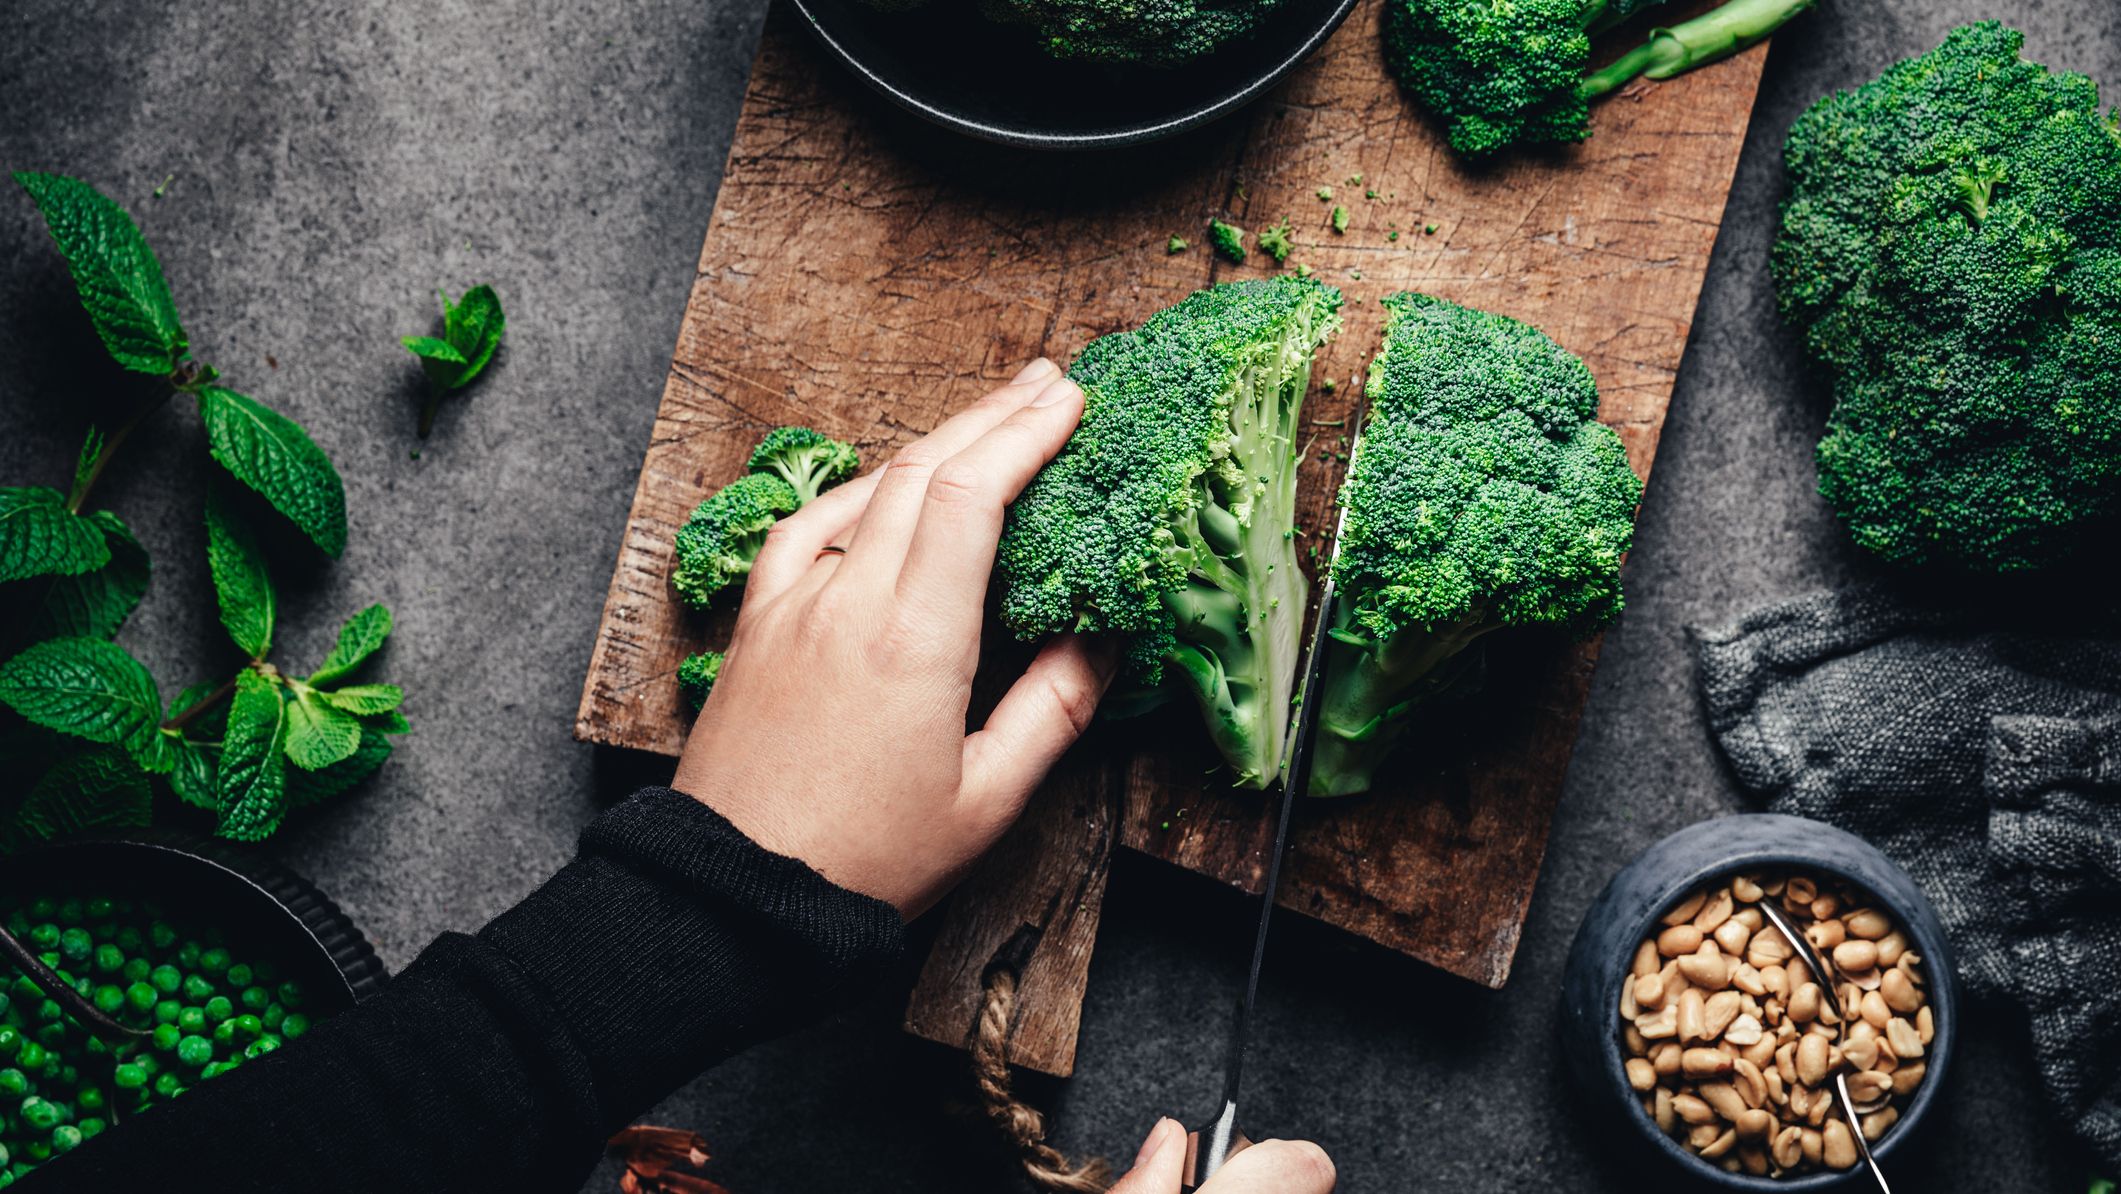 https://hips.hearstapps.com/hmg-prod/images/woman-cutting-fresh-broccoli-royalty-free-image-1640790688.jpg?crop=1xw:0.84415xh;center,top